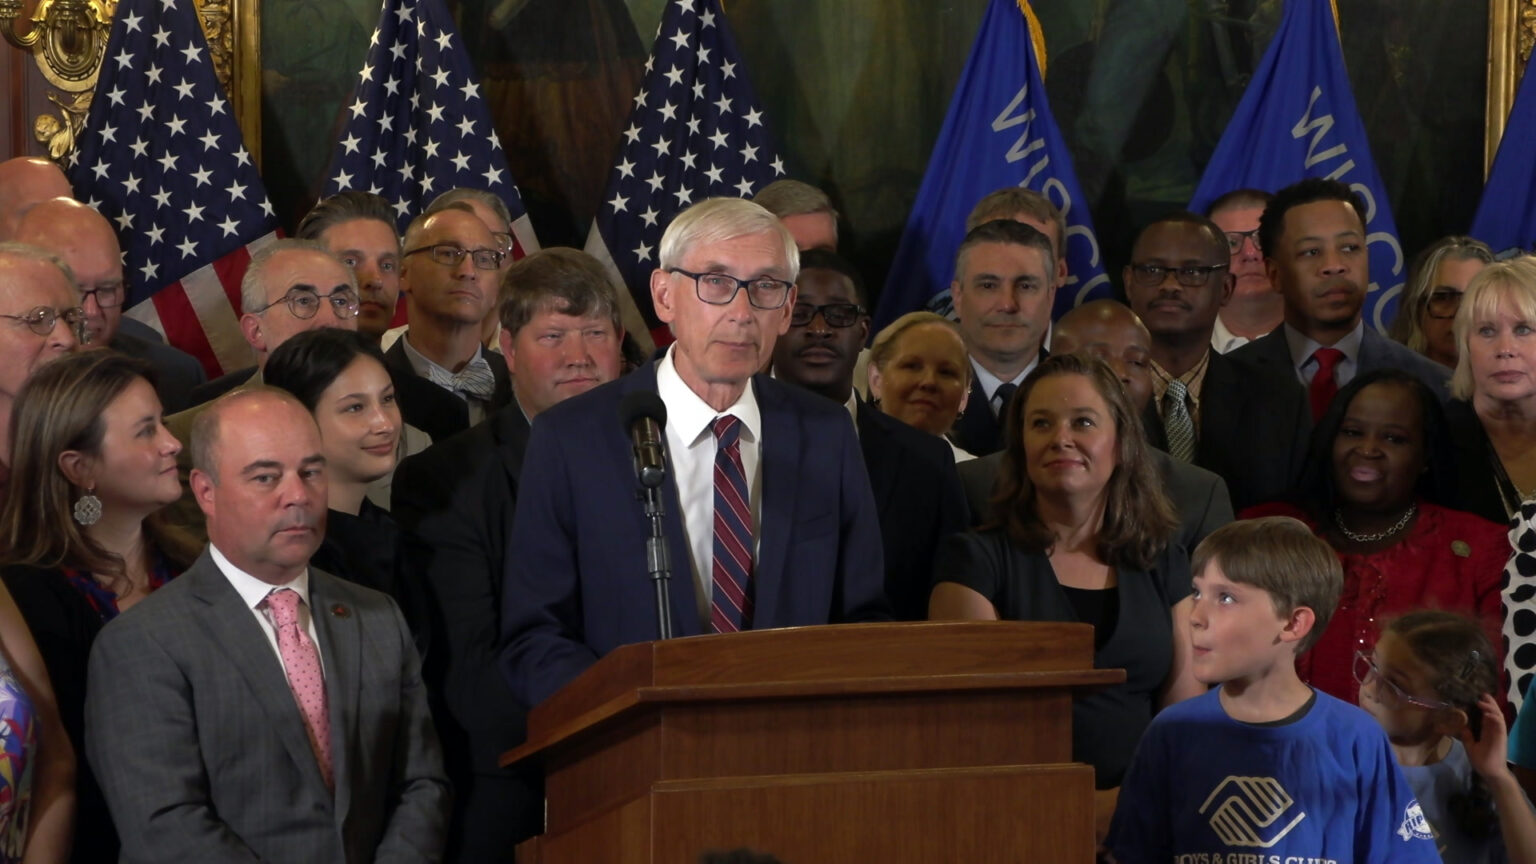 Tony Evers stands and speaks into a microphone mounted on a wood podium, with people standing behind him and to his side, and more people seated facing him, in a room with U.S. and Wisconsin flags in front of a large painting.